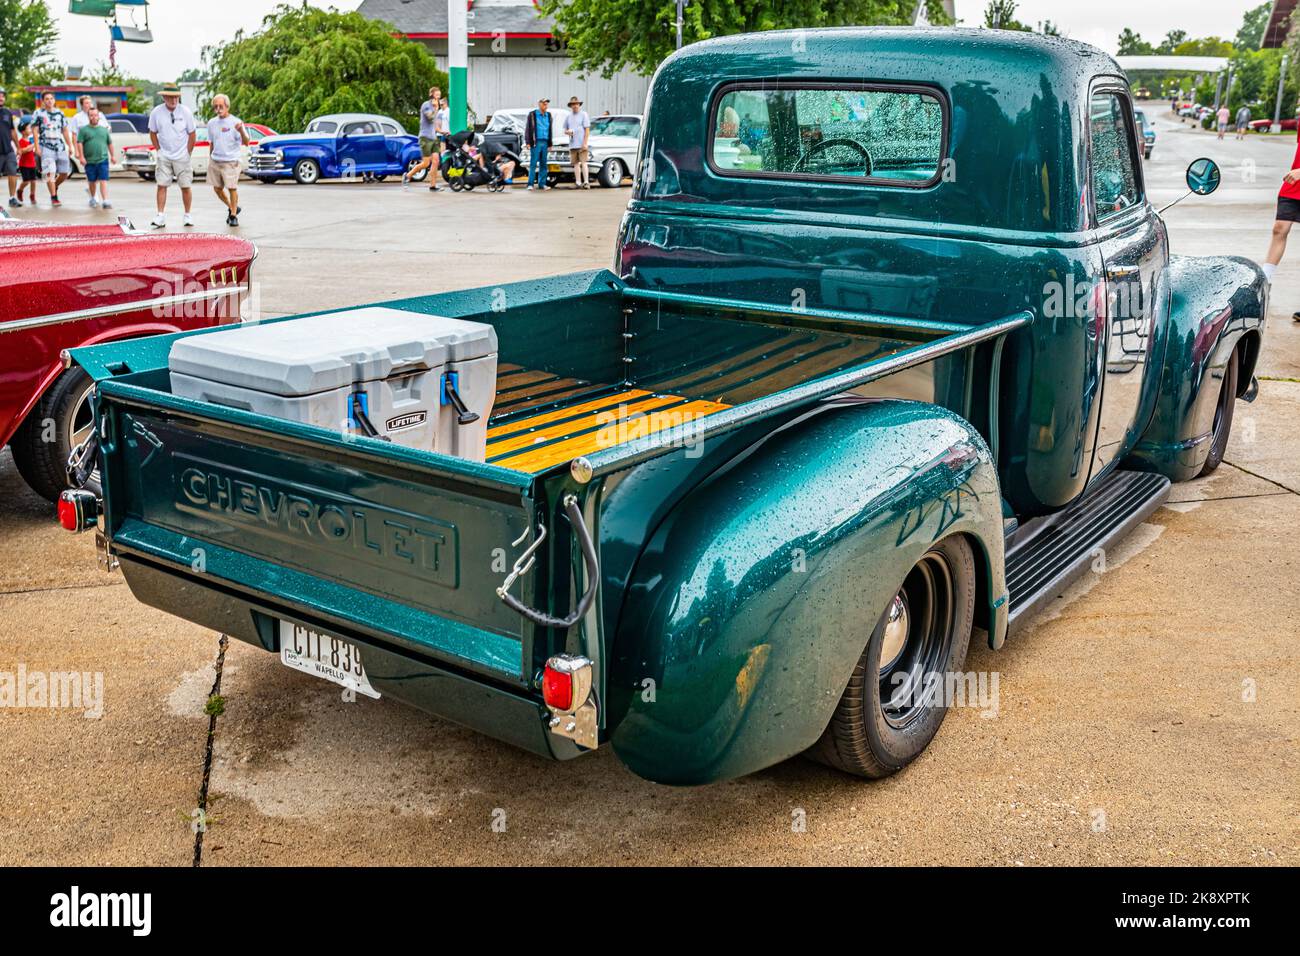 Des Moines, IA - July 01, 2022: High perspective rear corner view of a 1949 Chevrolet 3100 Stepside Pickup Truck at a local car show. Stock Photo